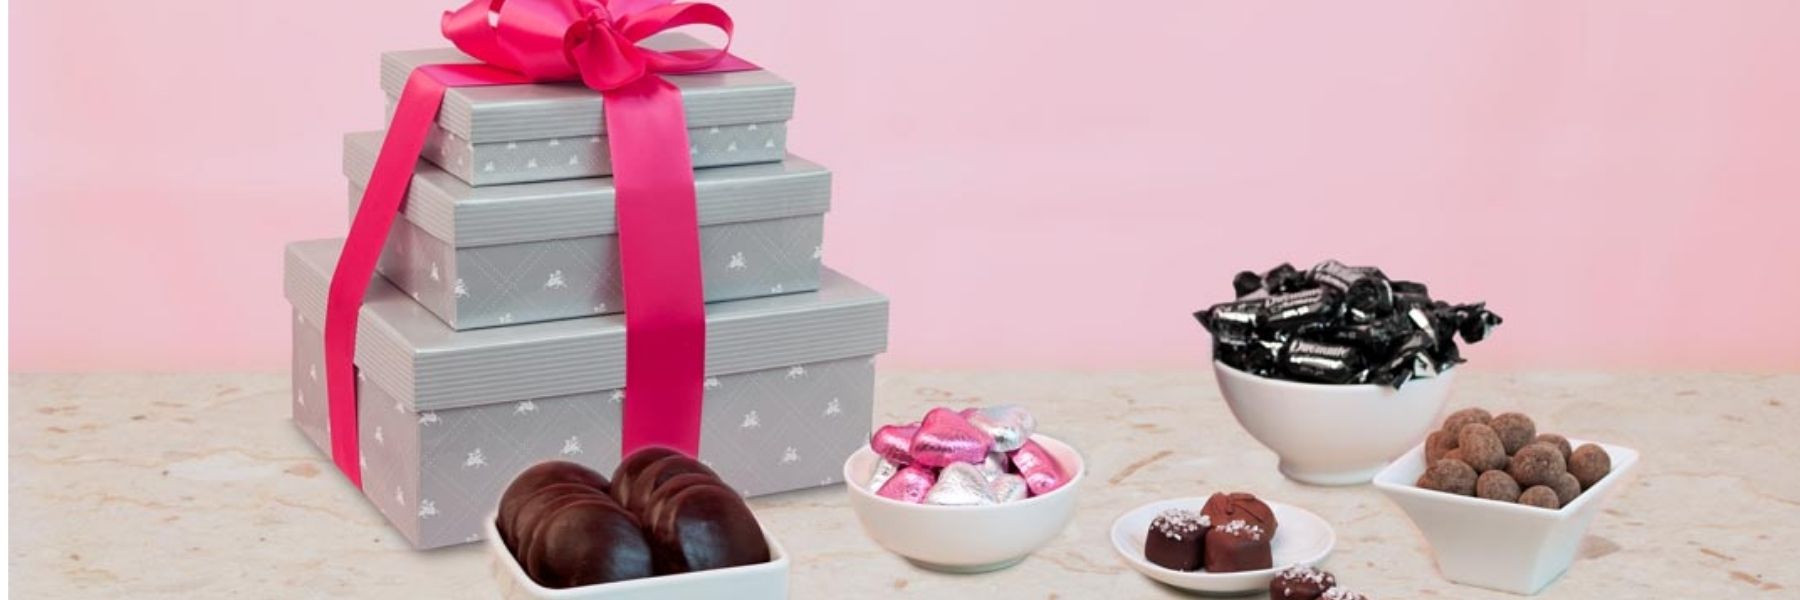 Dilettante Chocolates Valentine's Gift Tower Featuring Chocolates and Cookies for Your Valentine